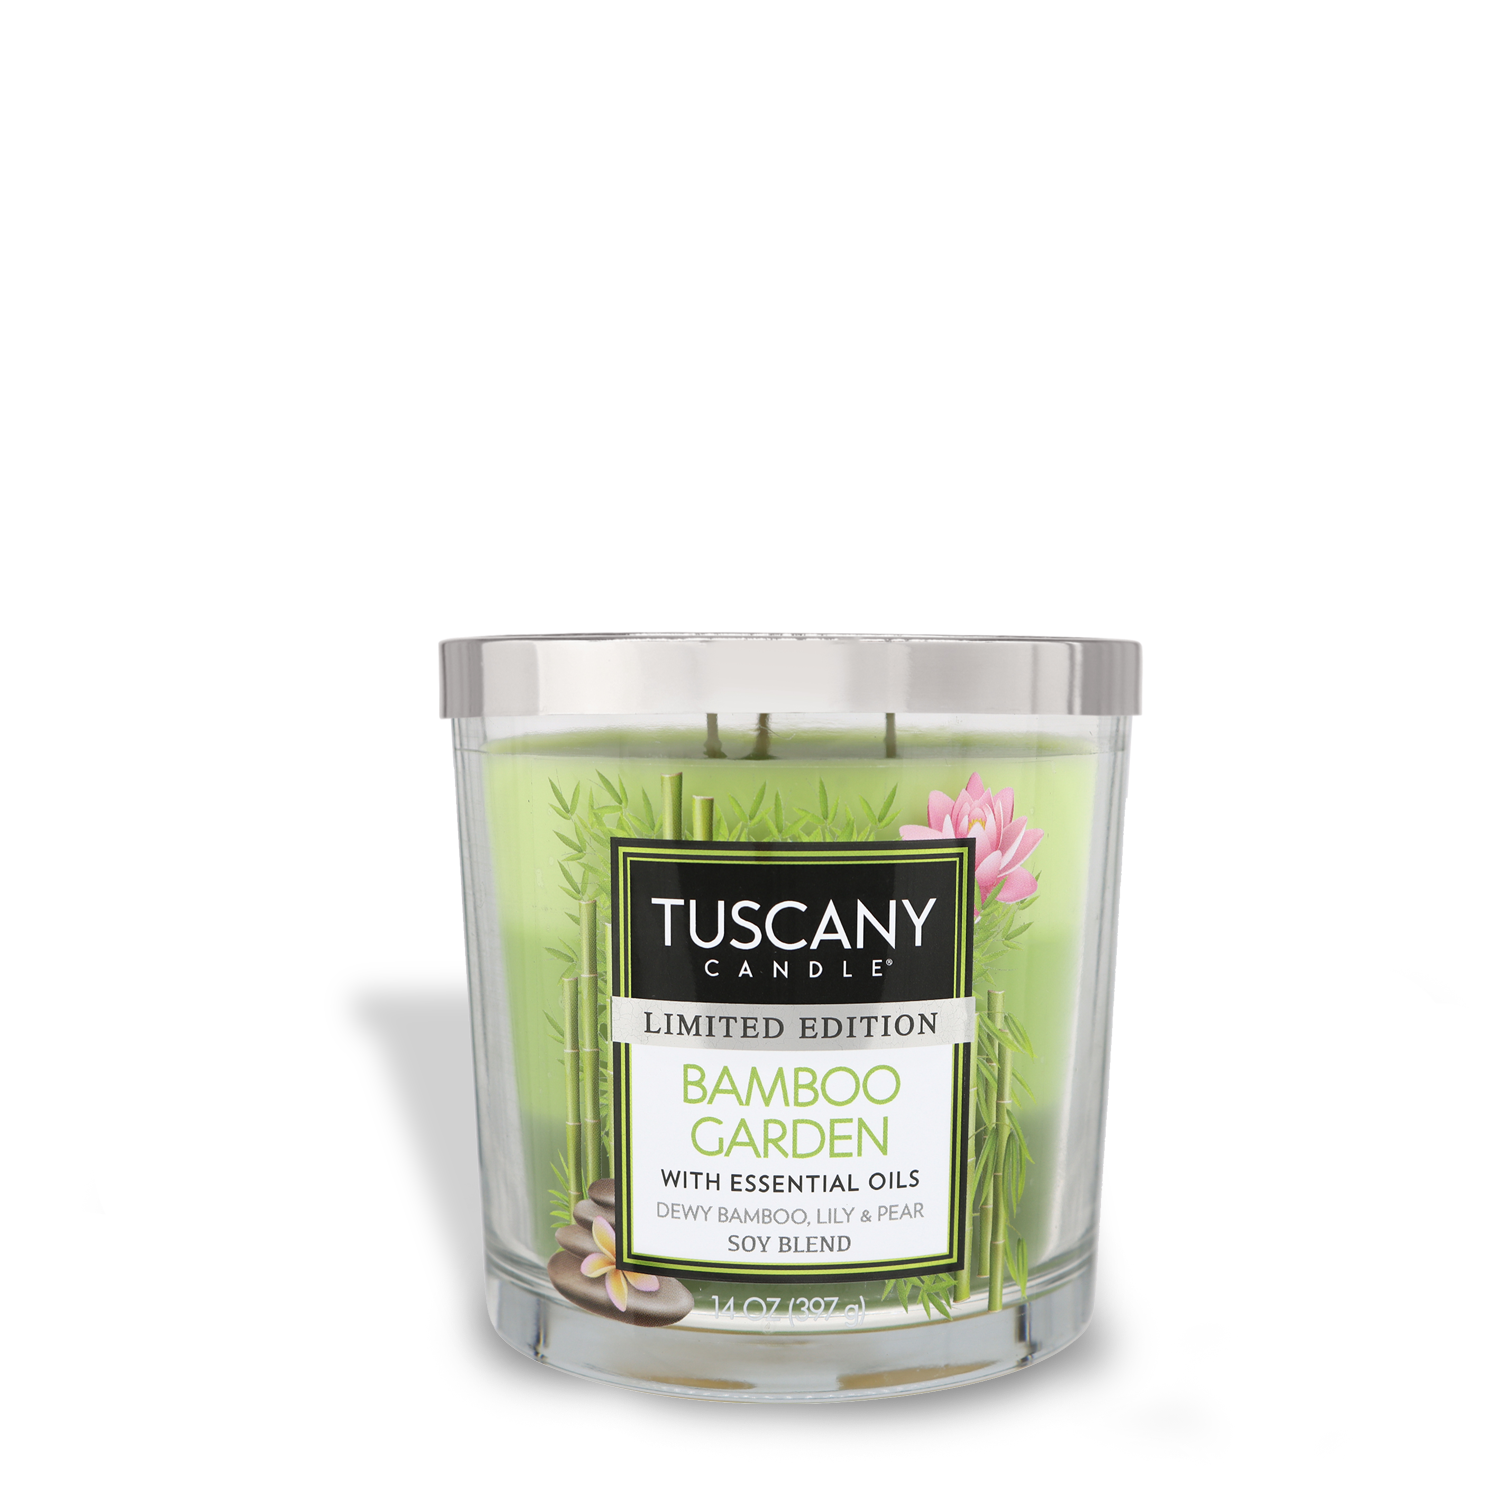 A Tuscany Candle® SEASONAL Bamboo Garden Long-Lasting Scented Jar Candle (14 oz) in a glass jar with a white background.